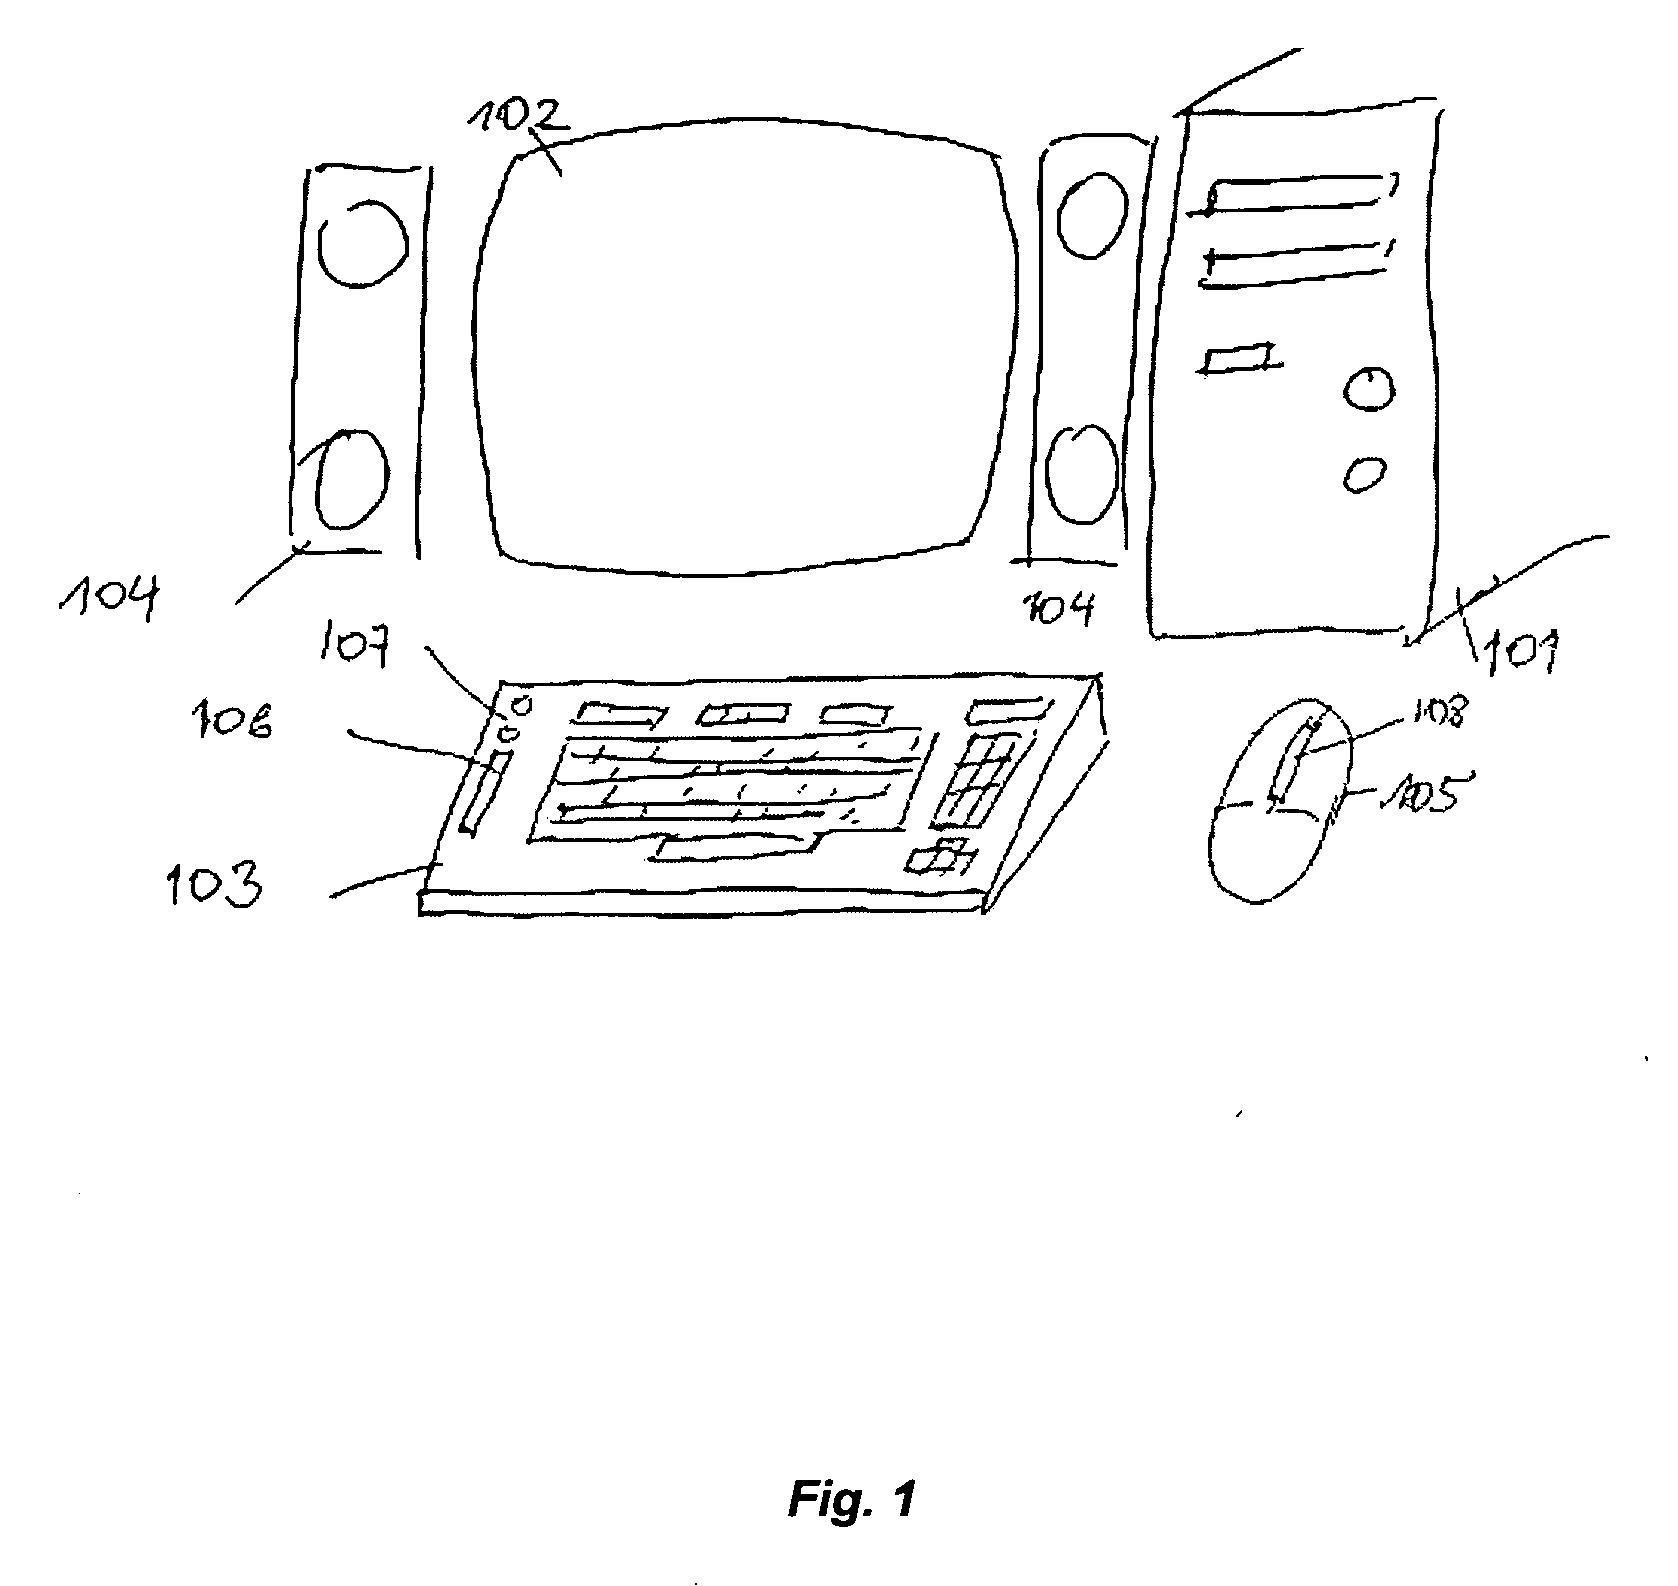 Optical slider for input devices